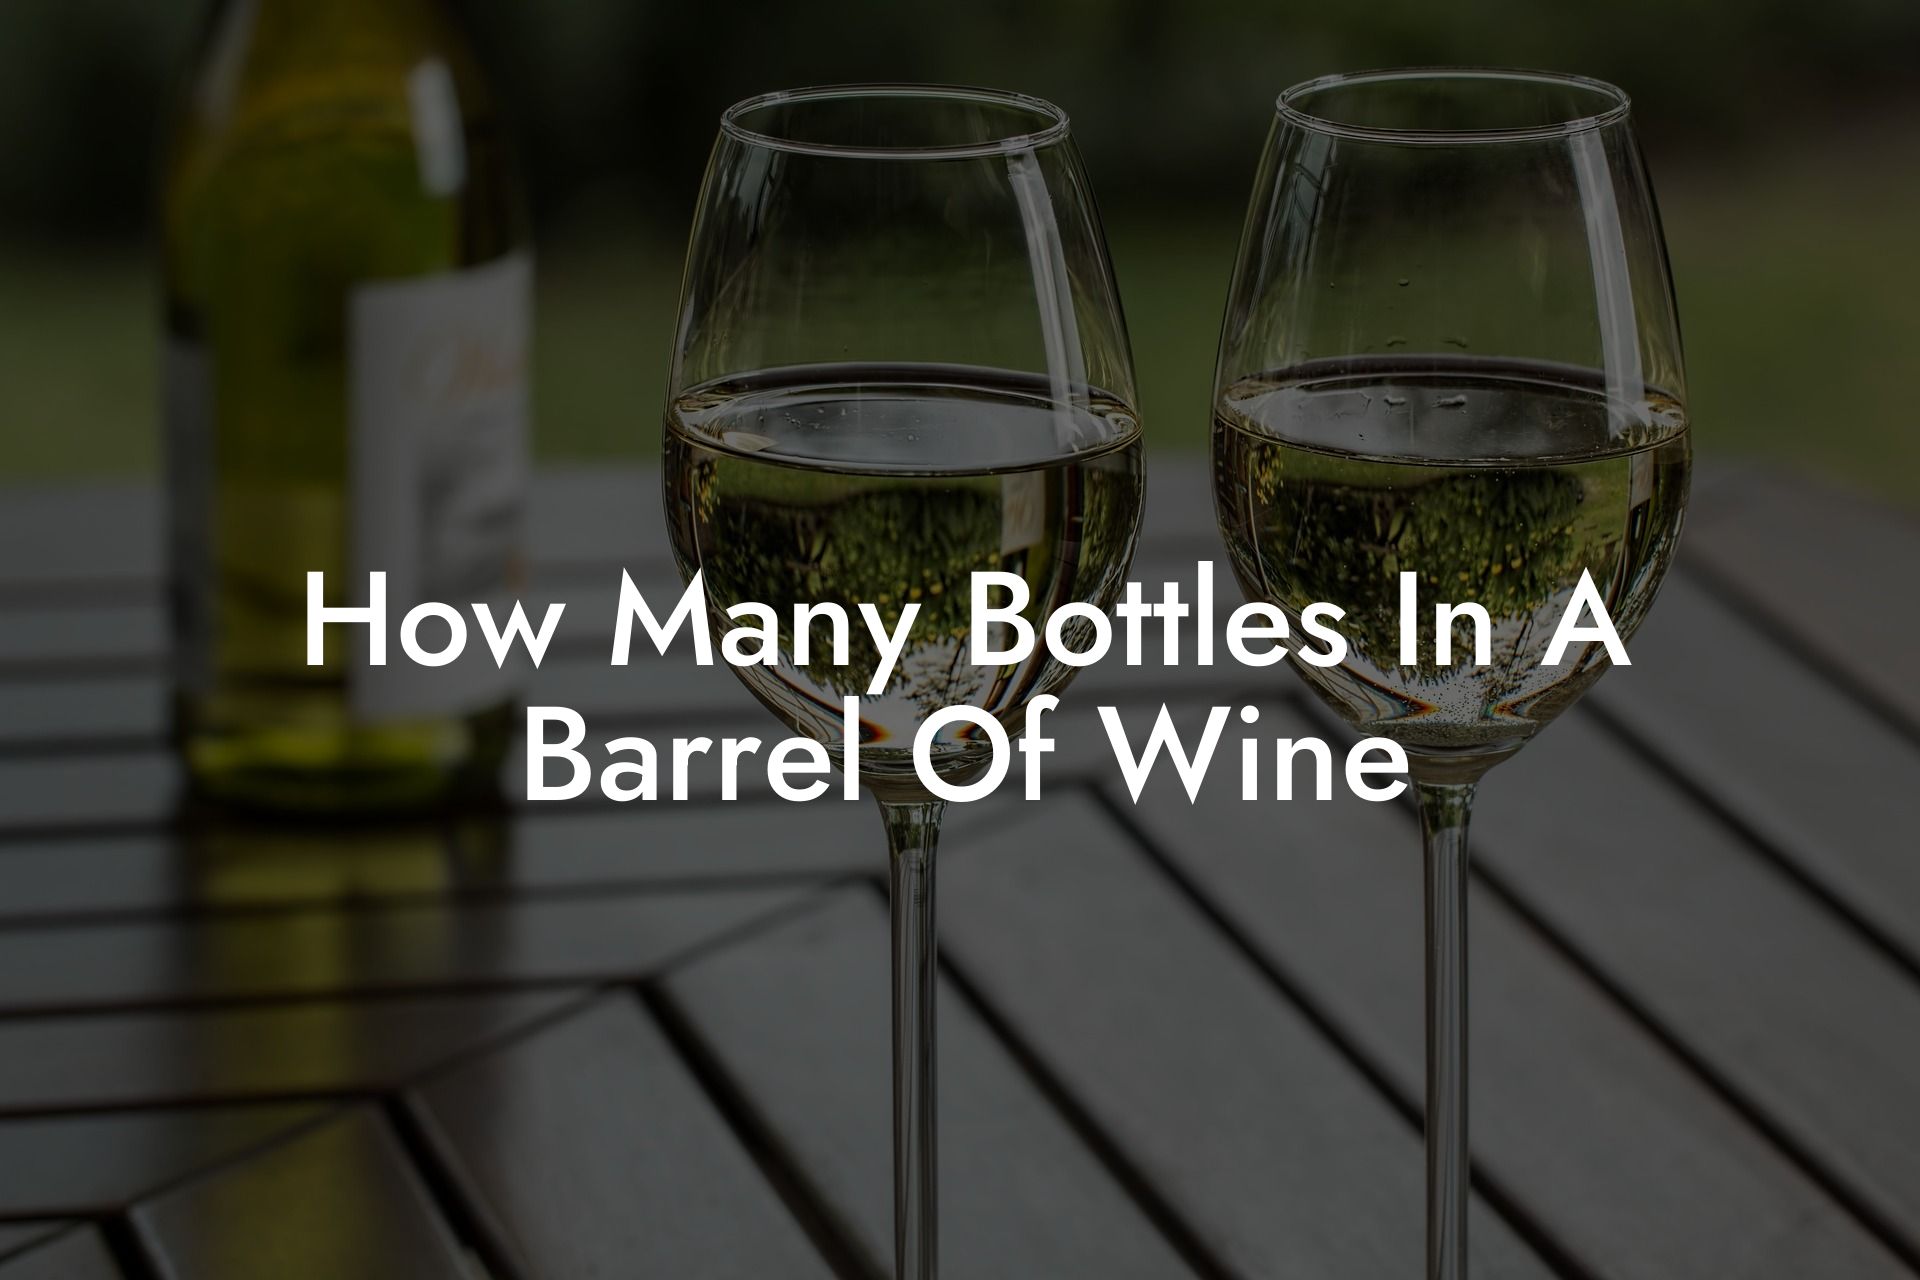 How Many Bottles In A Barrel Of Wine